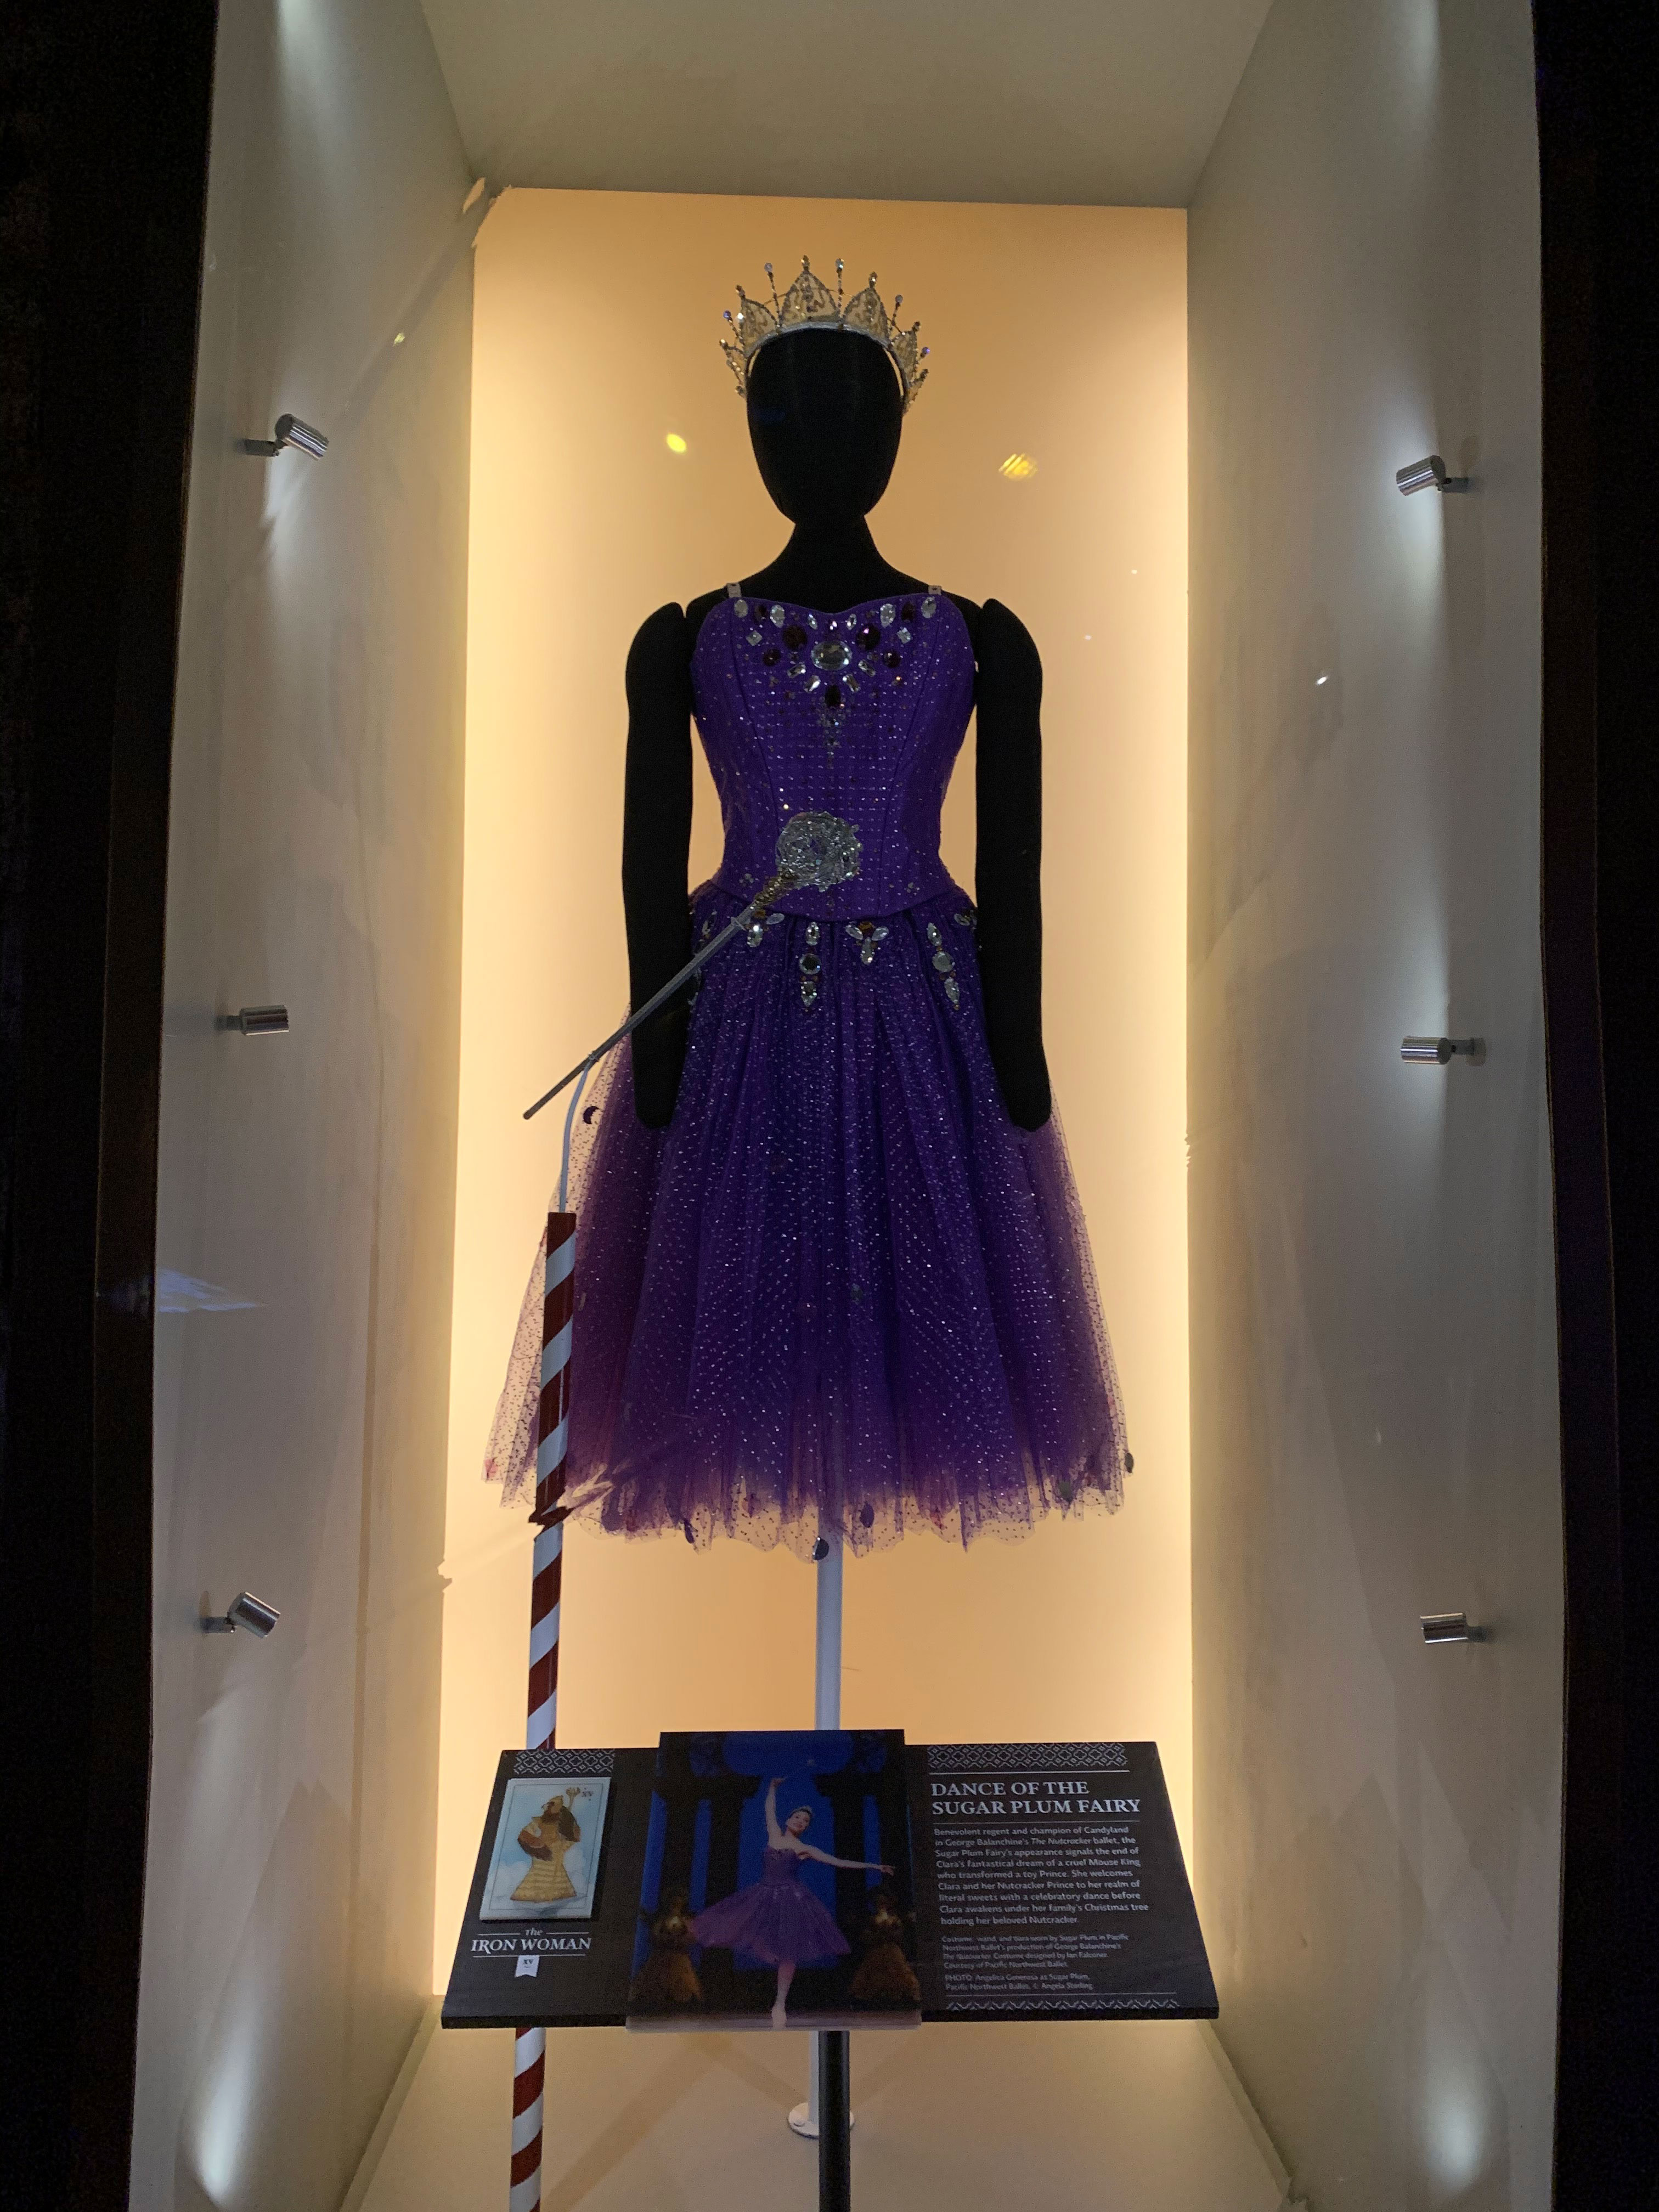 Costume, wand, and tiara worn by Sugar Plum in Pacific Northwest Ballet's production of George Balanchine's 'The Nutcracker'